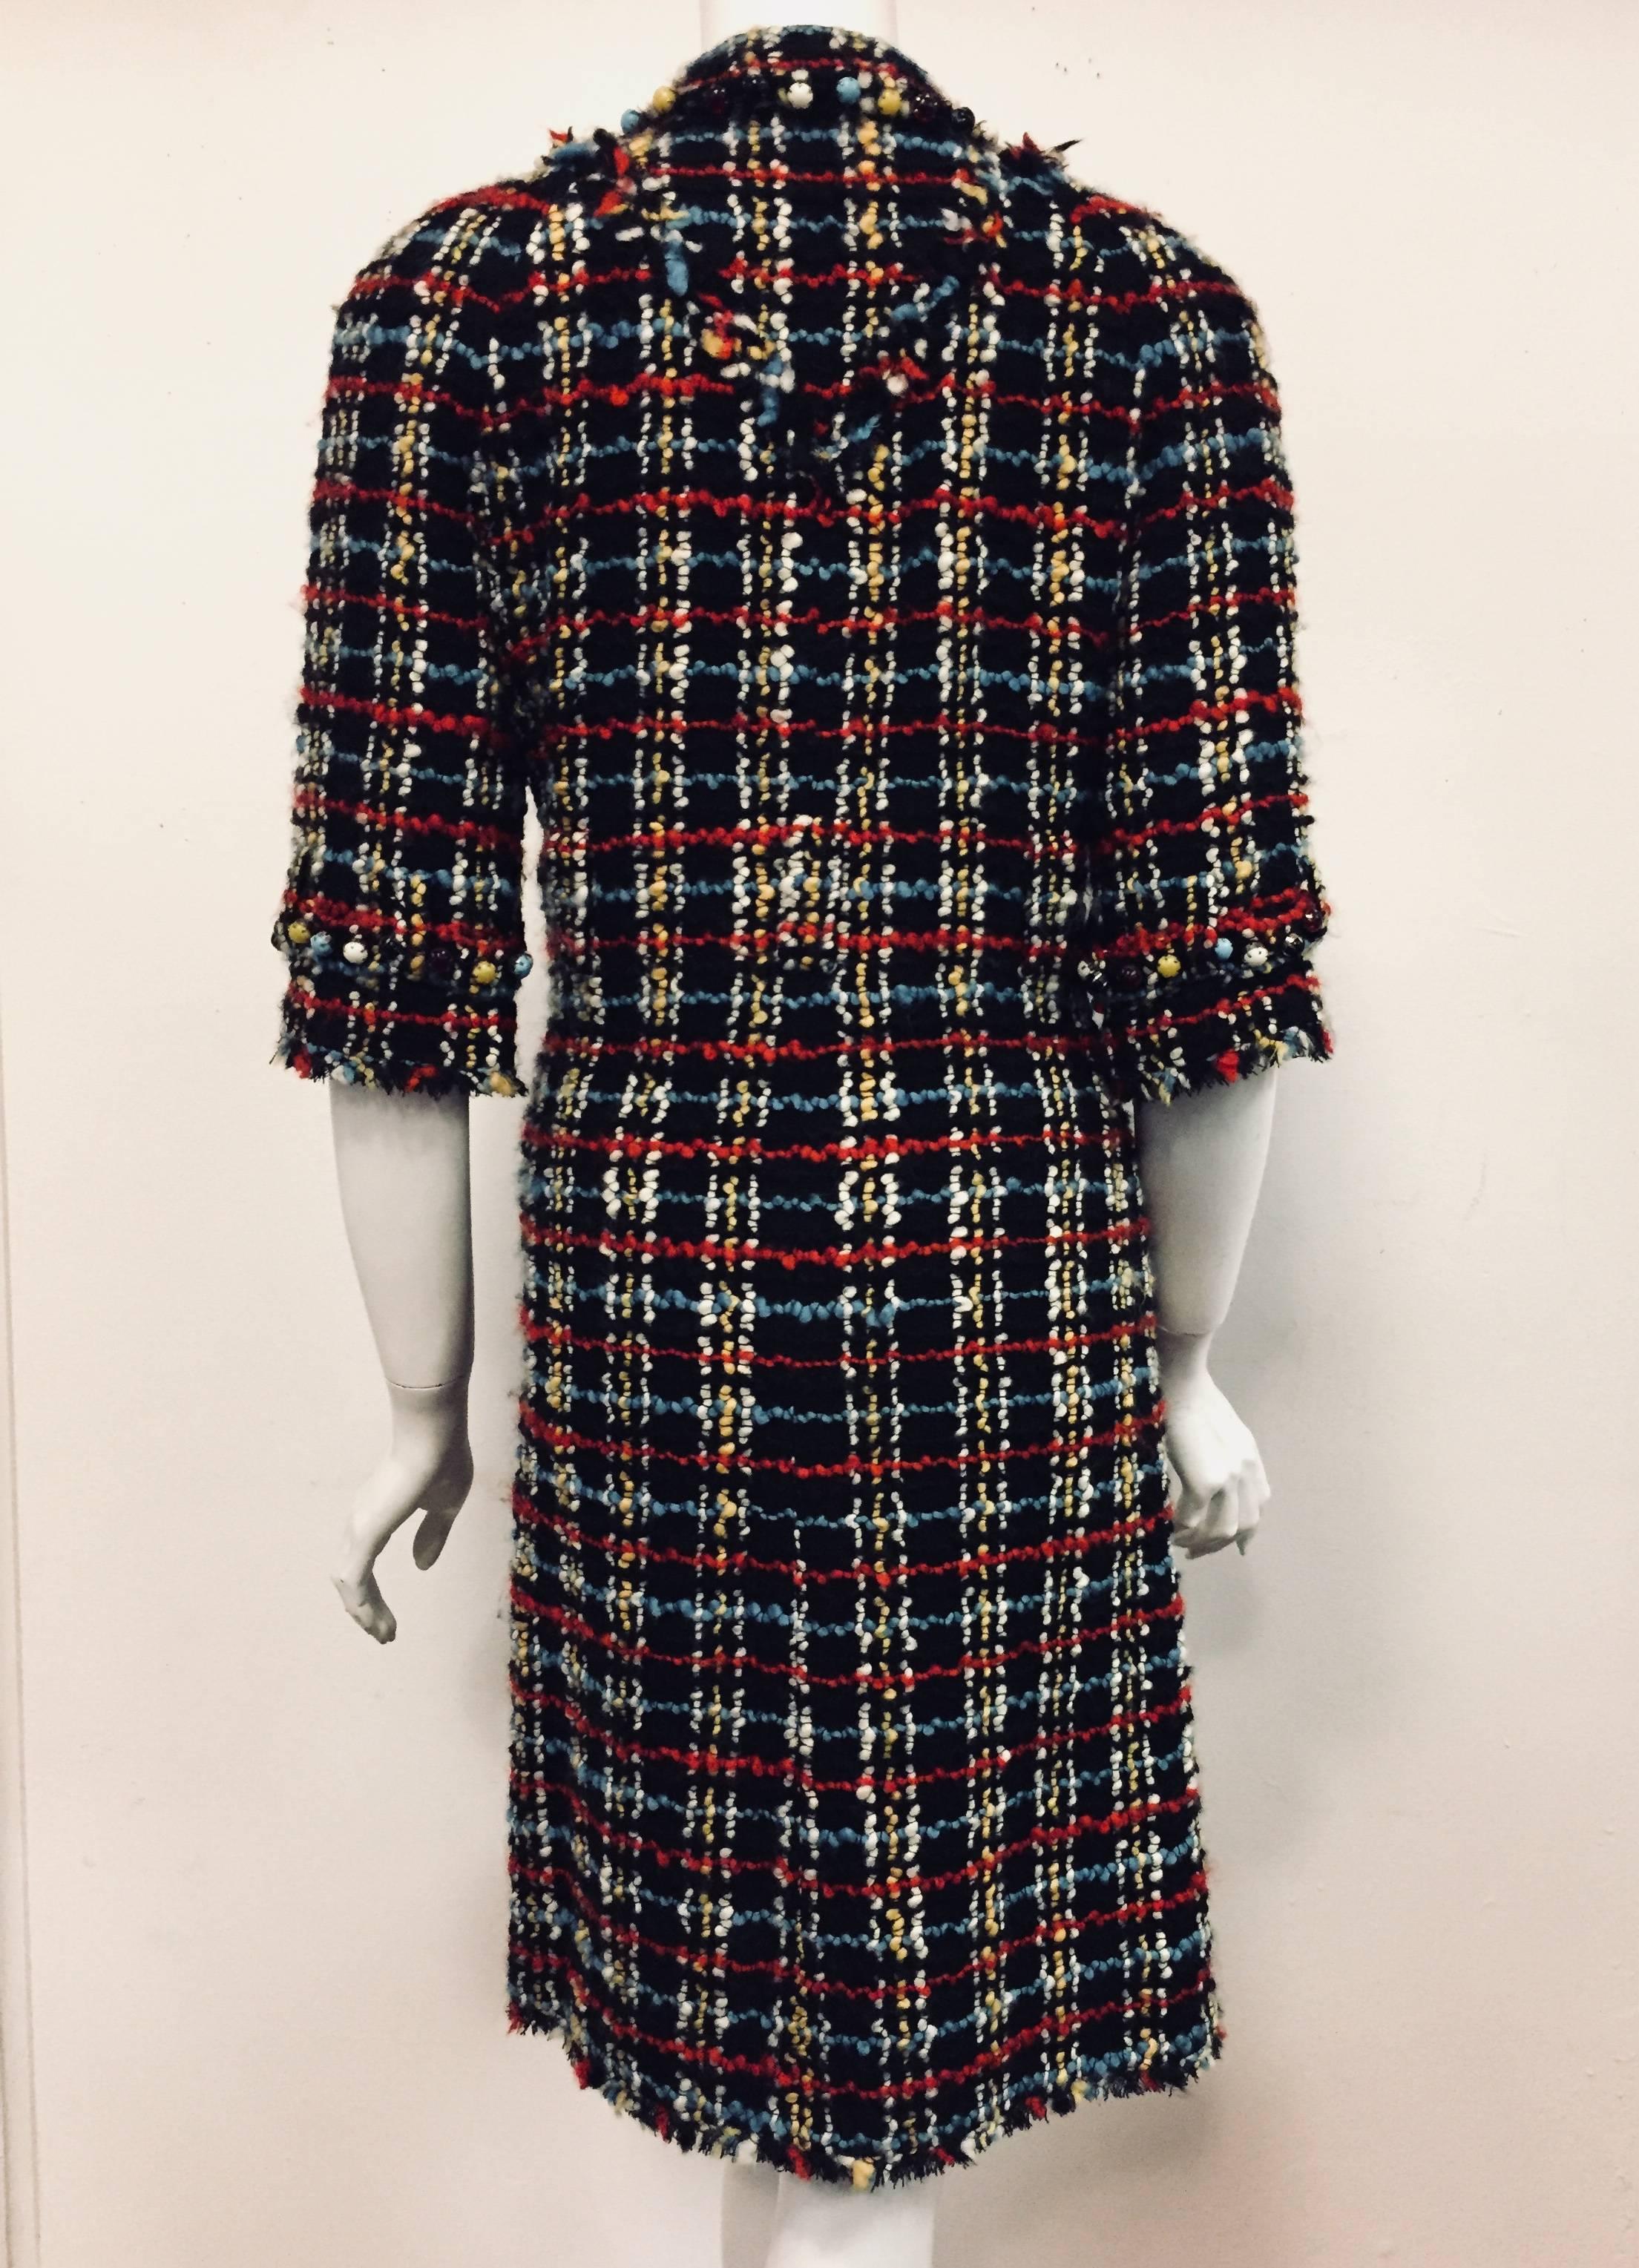 Chanel black base and multicolor wool bouclé dress coat will make you stand out in a crowd.  This fringed at sleeves and hem dress features faux semi precious stones in red, black, yellow and turquoise on collar, cuffs, pockets and both sides of